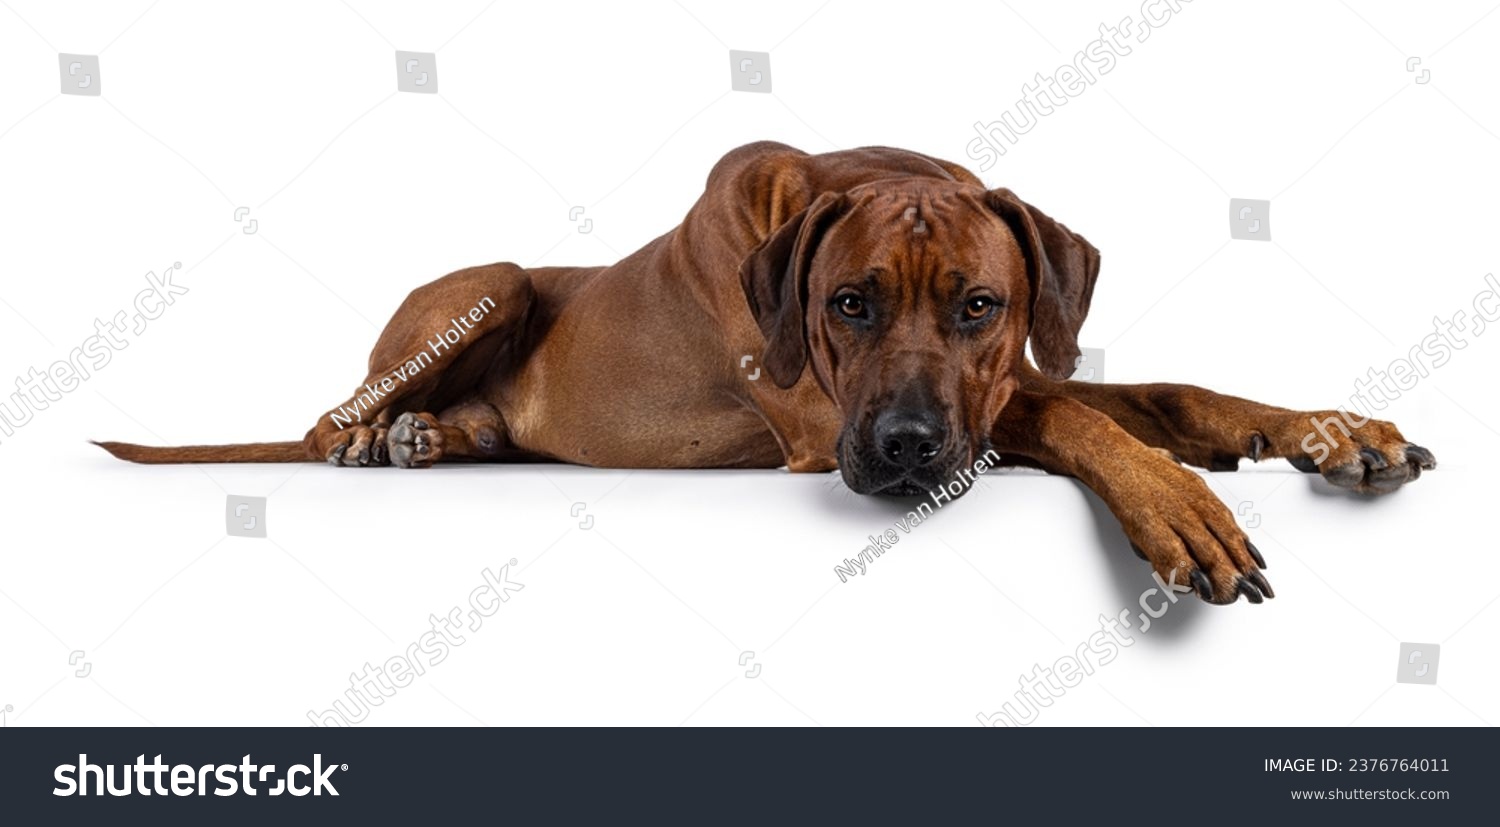 Handsome male Rhodesian Ridgeback dog, laying down side ways with head and paws over edge. Looking straight towards camera. Isolated on a white background. #2376764011